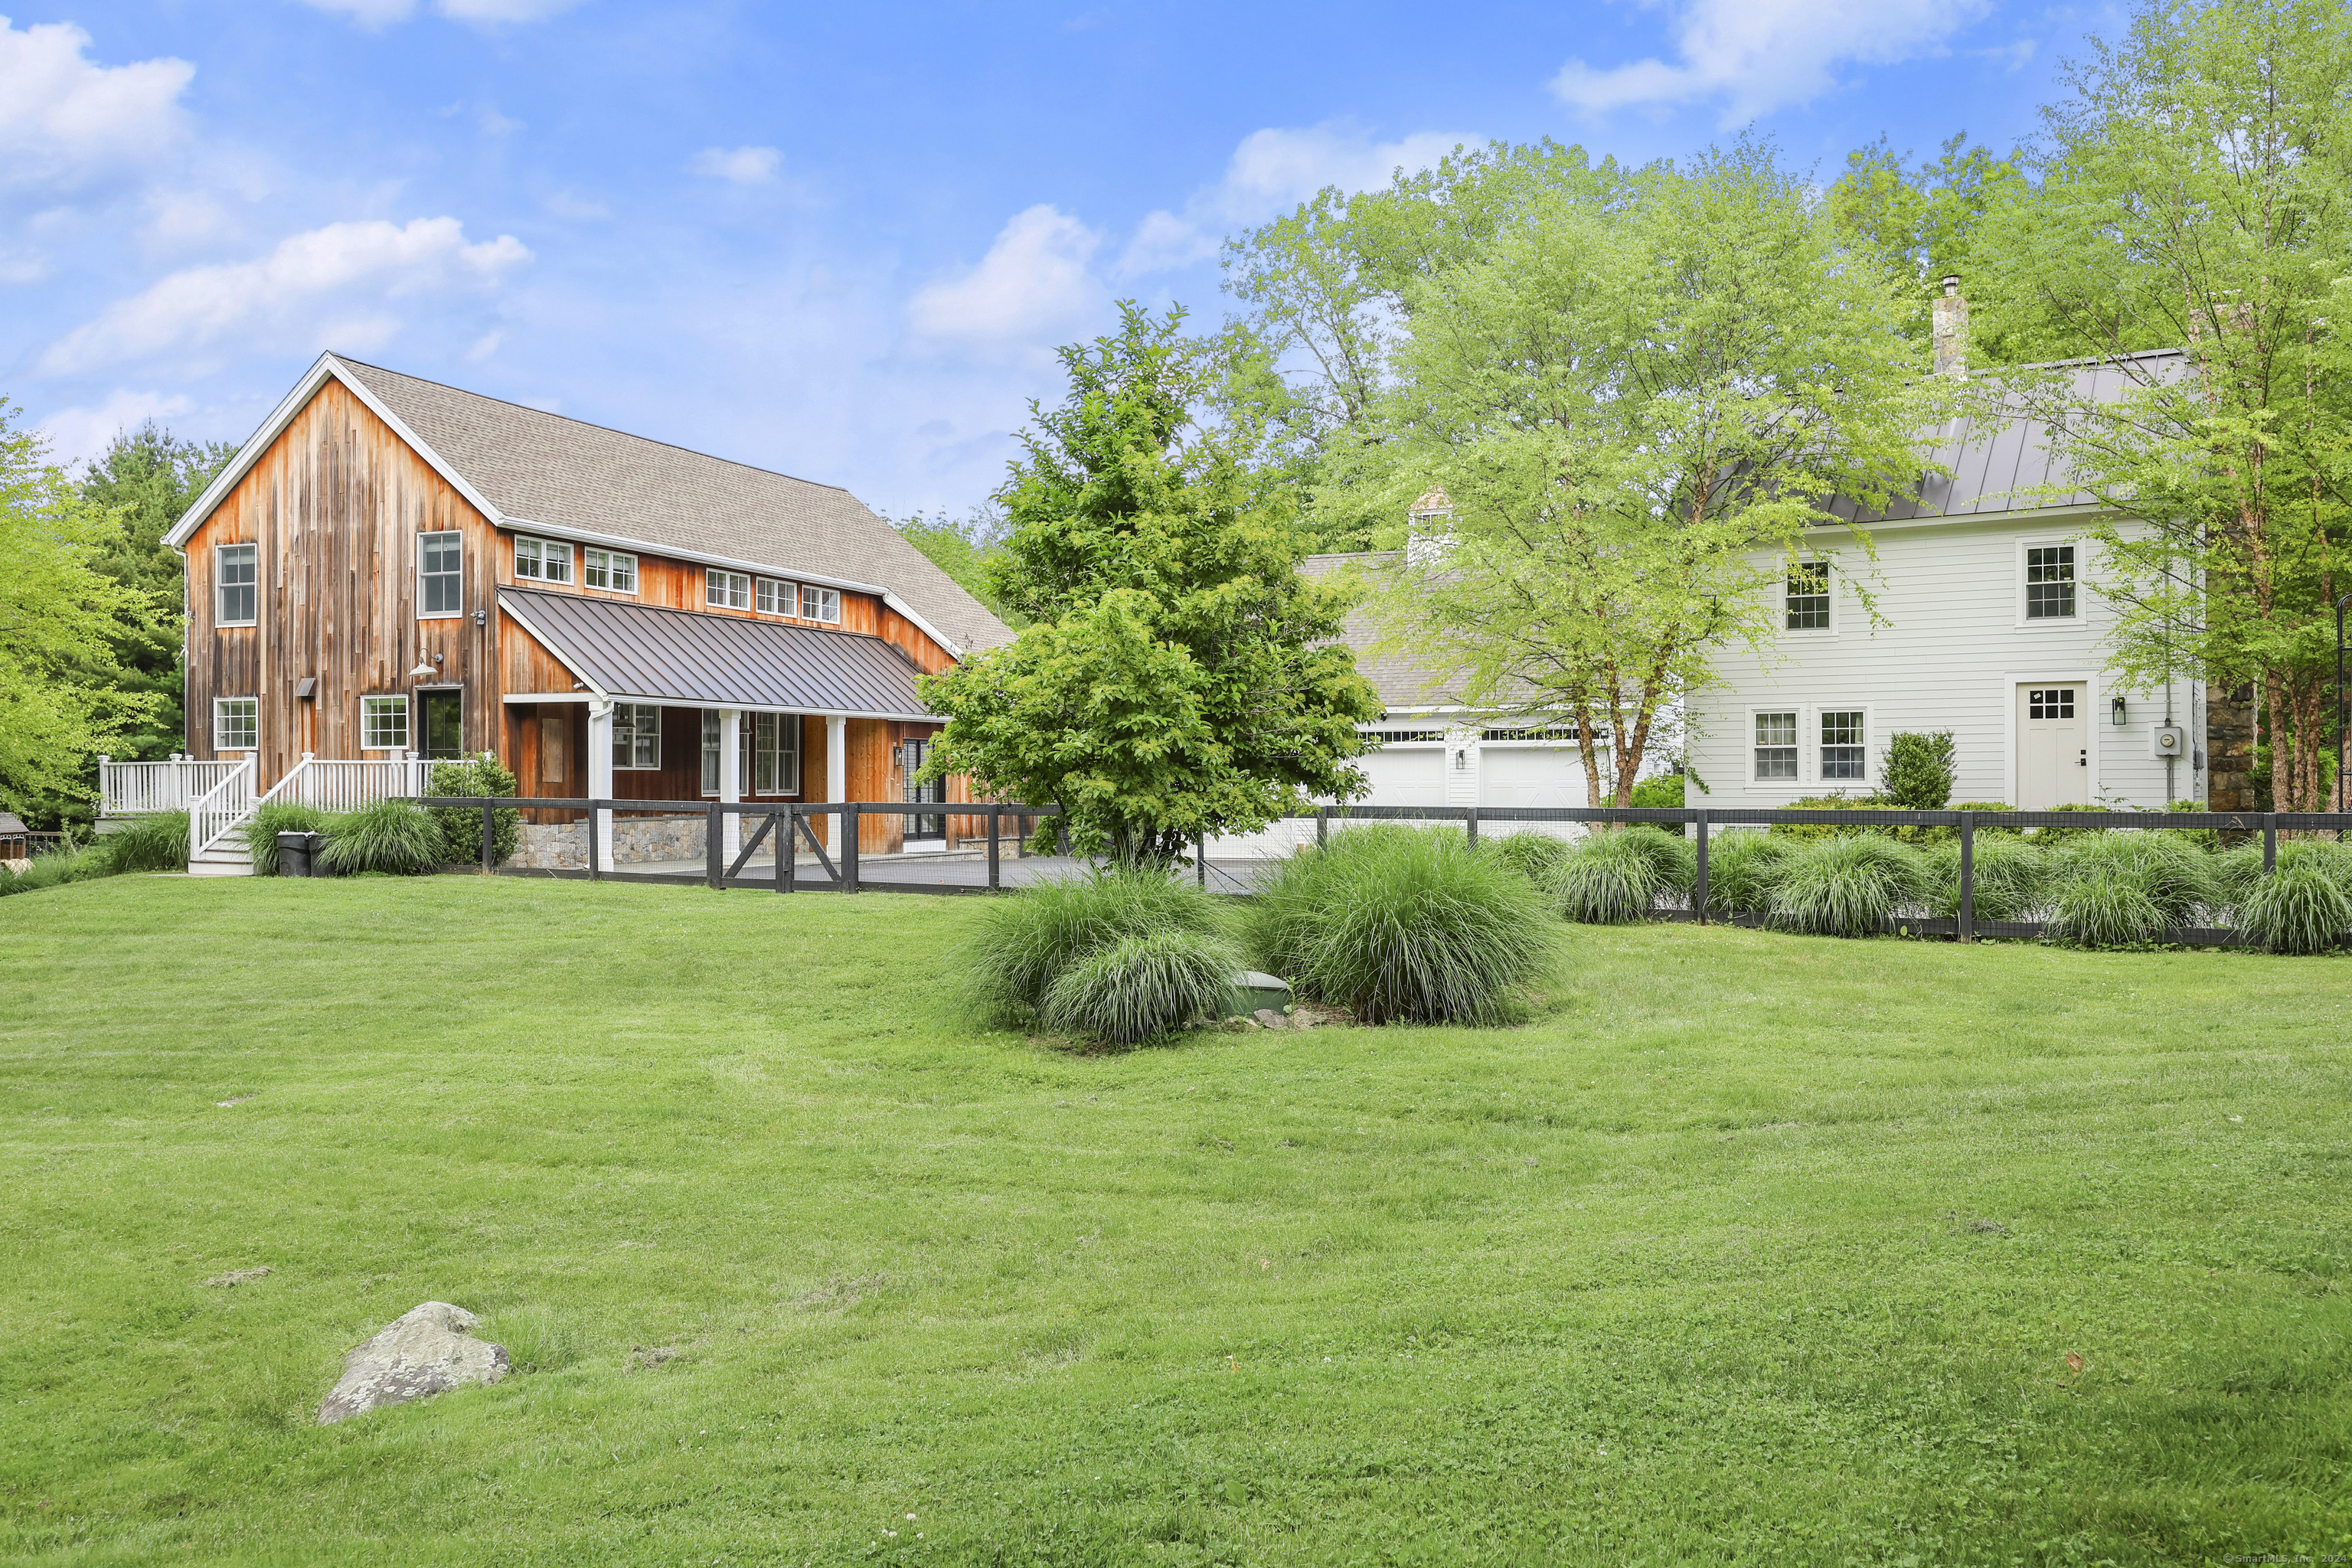 Welcome home to this gorgeous turn-key converted barn set on 1.55 acres close to downtown Ridgefield! The property also features a 3-car garage with large studio above and a 1, 480 sq ft guest house. The main house features an open floor plan ideal for everyday living and entertaining with walls of glass for abundant natural light. Additional highlights are 11 ft ceilings, white oak flooring throughout, high-end lighting fixtures, and central air. The living room features a fireplace and is open to the dining room with sliders to the rear patio and overlooks the beautiful property. The heart of the home is the chefs eat-in kitchen with Carrara marble counter tops, a wall of built-ins, large center island, and glass door to deck. Upstairs find the primary bedroom with beamed cathedral ceiling, walk-in closet, and updated ensuite bathroom with Dolomite Italian Marble. The upper-level features two additional good-sized bedrooms. The finished lower level provides a spacious family room with engineered wood flooring and excellent storage space. The professionally landscaped property offers many areas to relax and enjoy the peaceful setting and is completely fenced with gated entry. Additionally, the property features a spacious studio above the garage great for a home office, and a guest house ideal for family or a rental. Come and see this move-in ready home today!